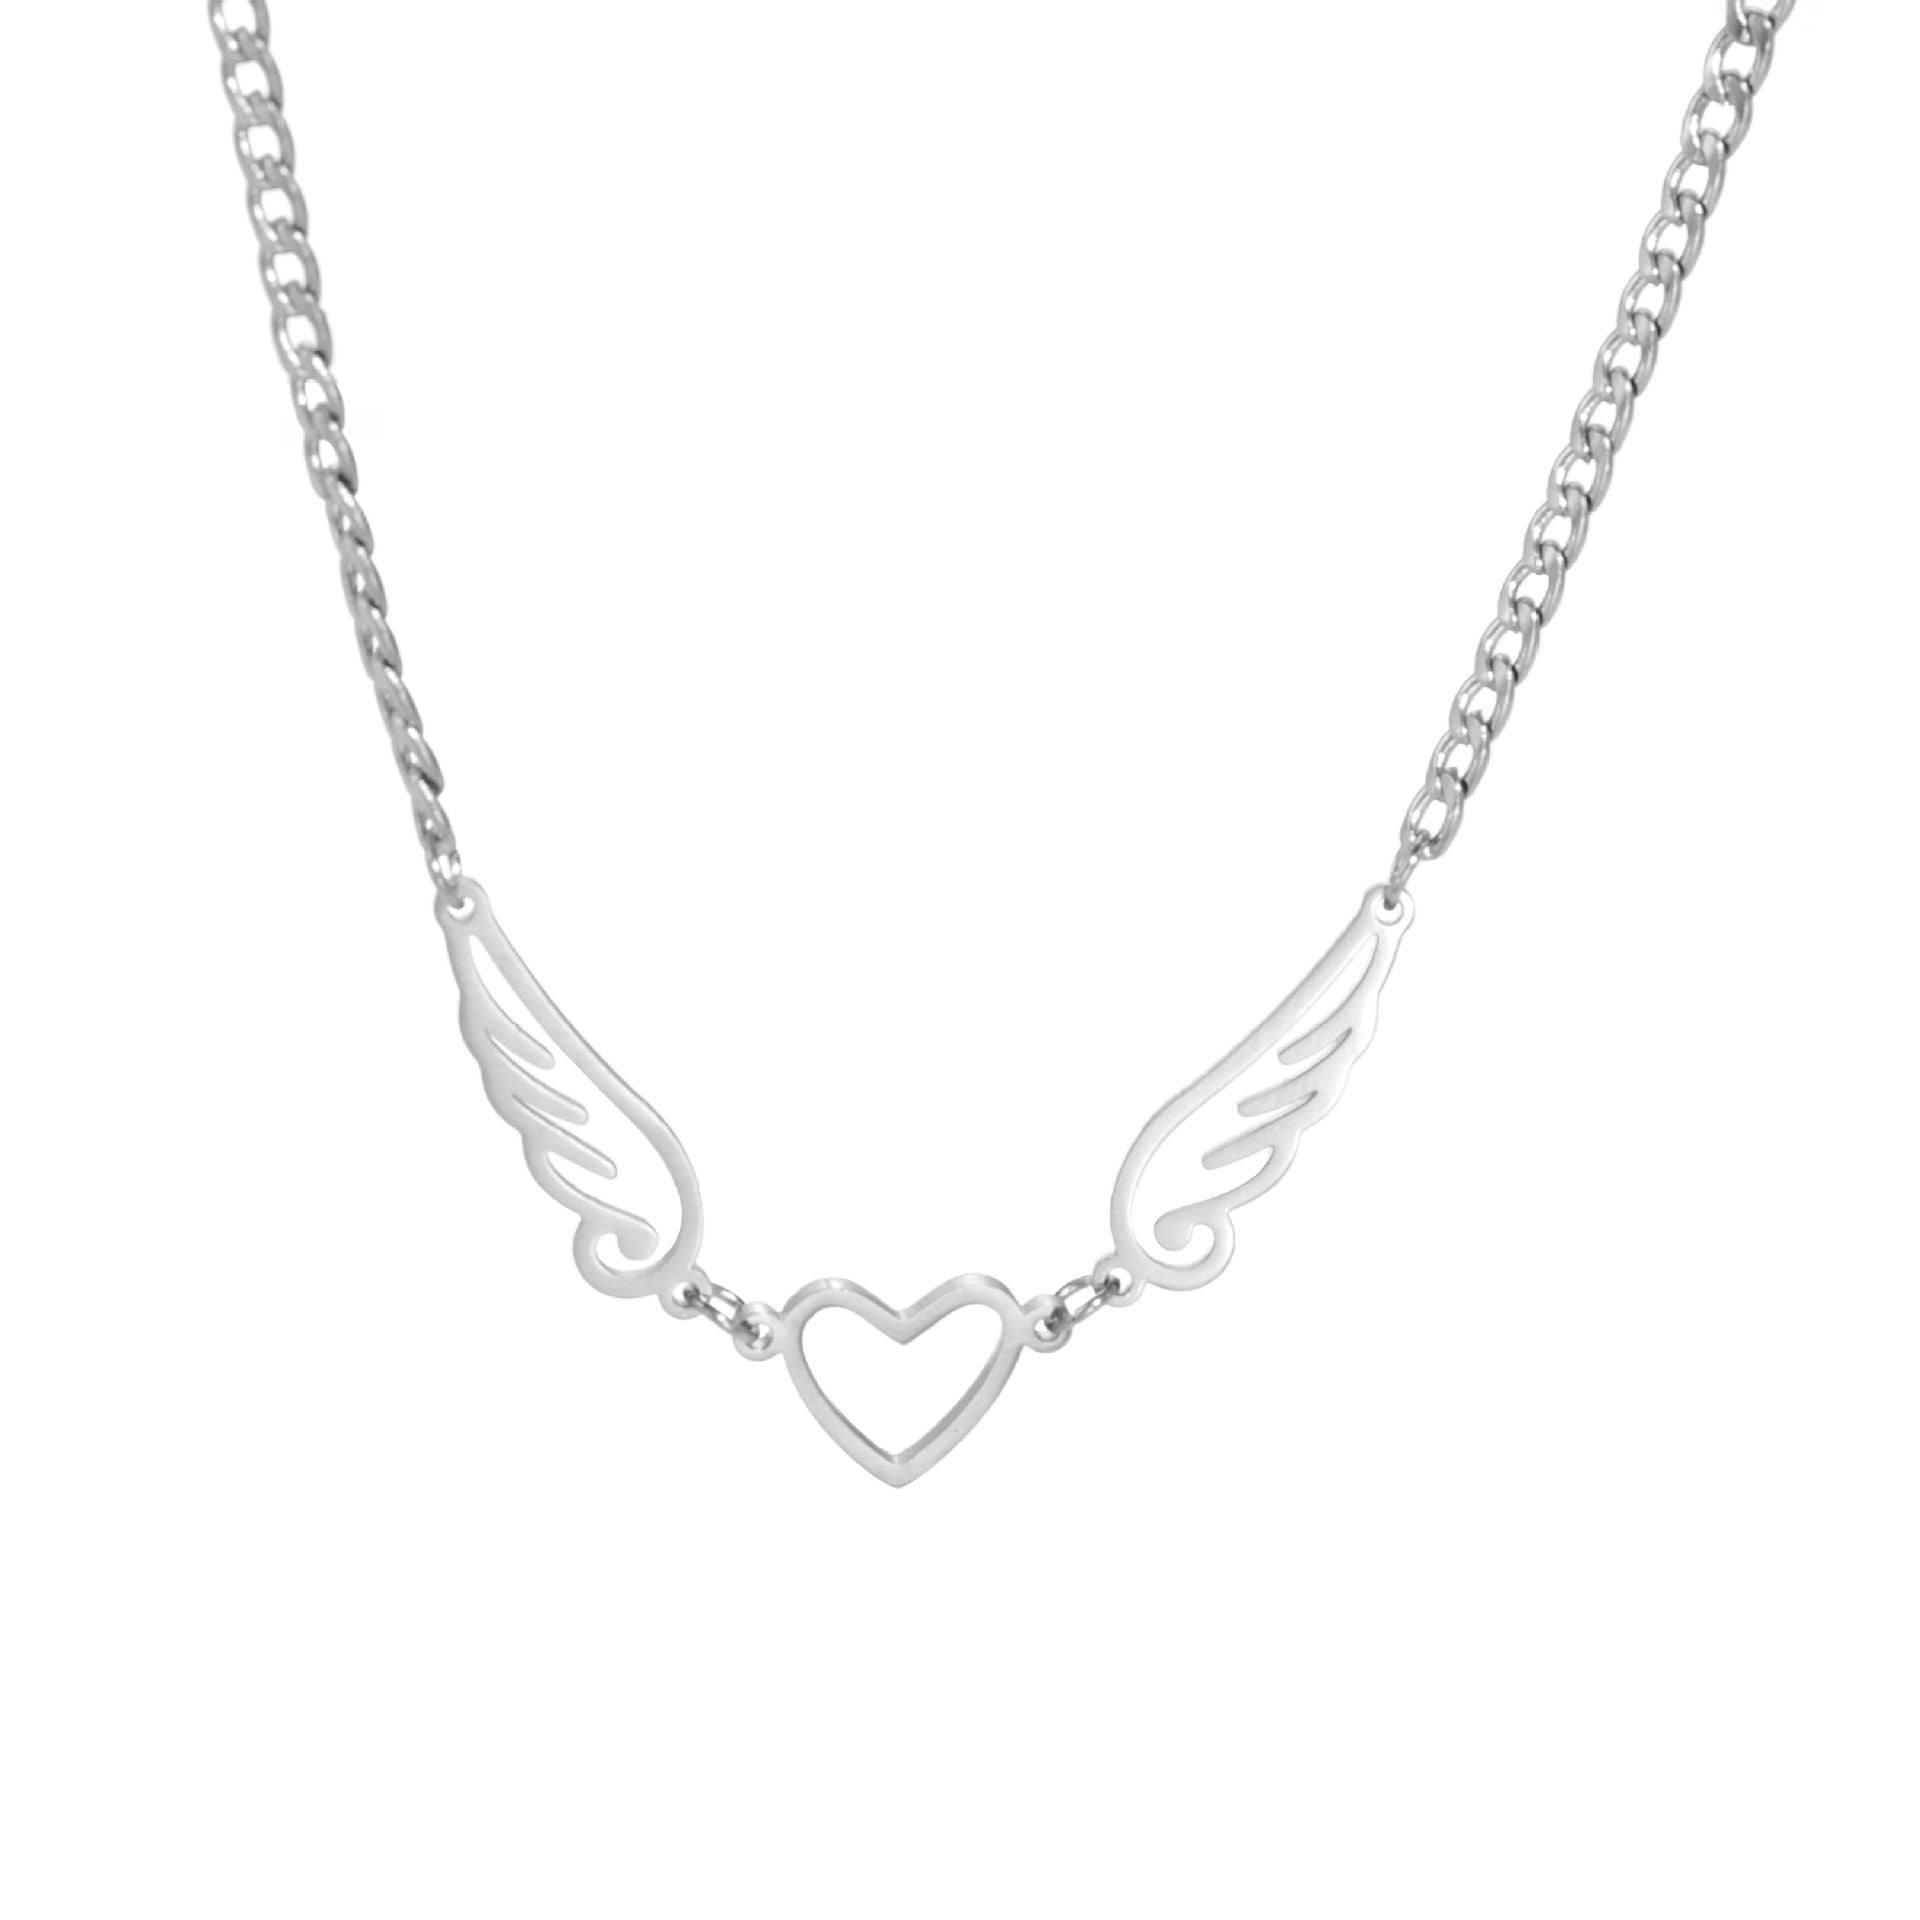 Winged Heart Necklaces: Unique Charm Jewelry Gifts-8